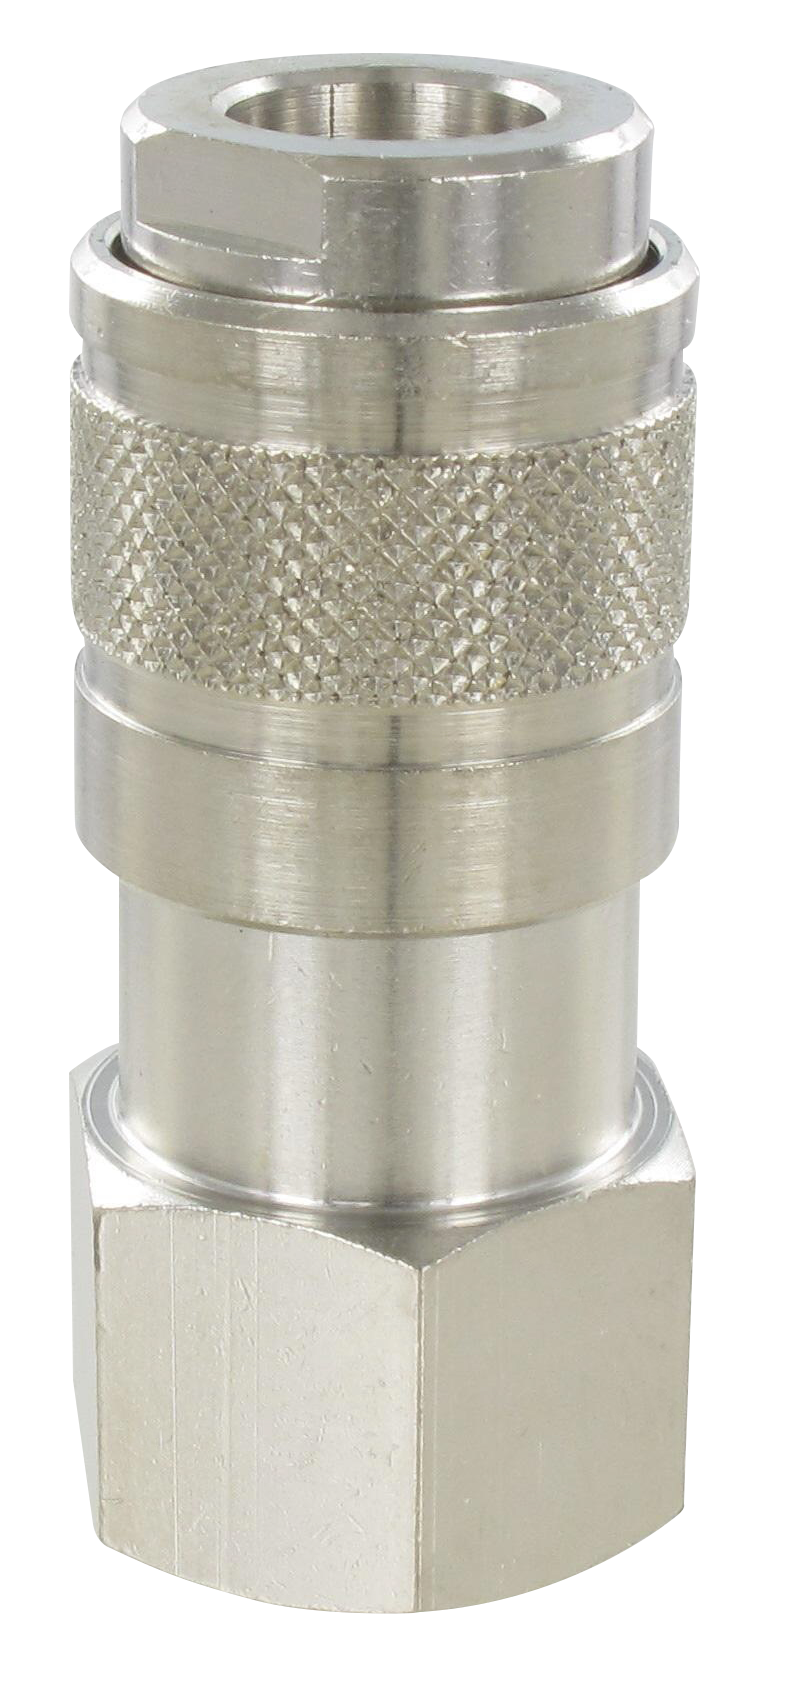 Quick-connect couplings, US-MIL standard ISO 6150 B-12 FEMALE SOCKET